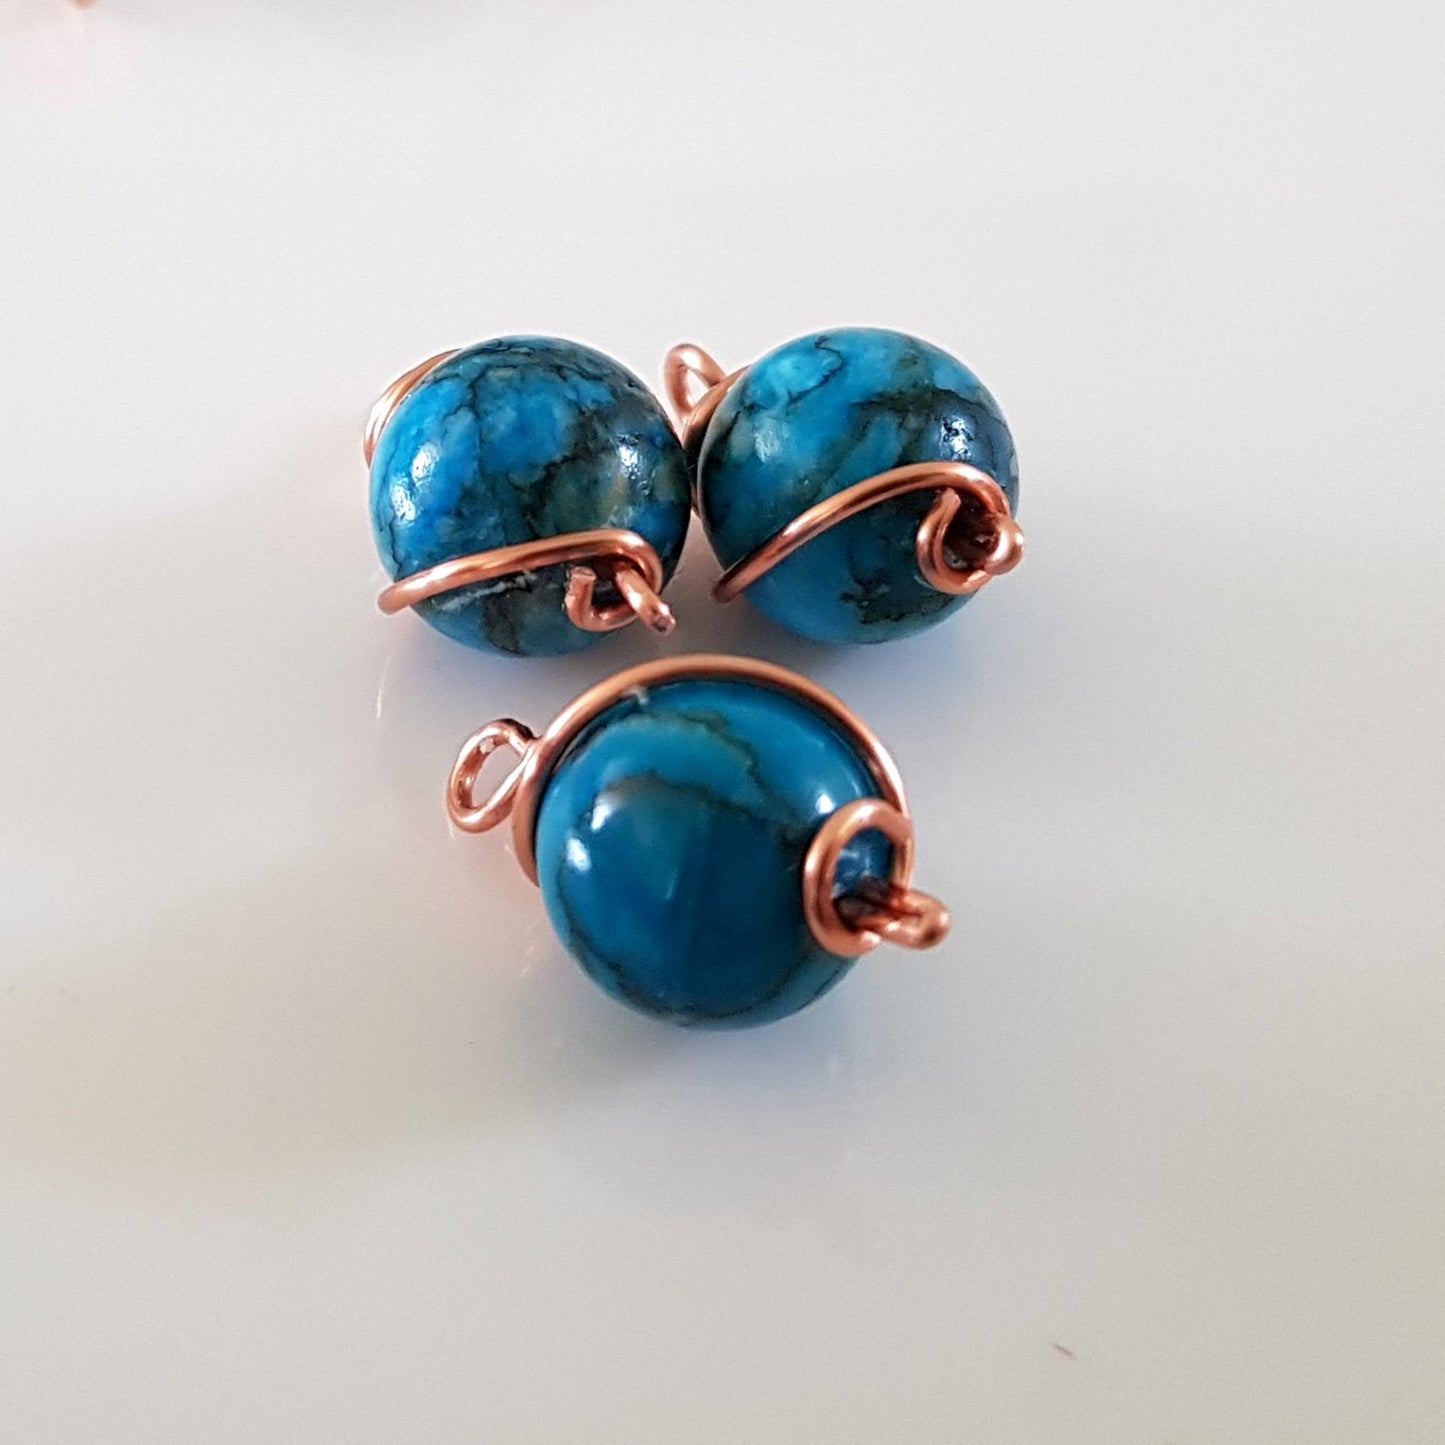 Copper Wire Wrapped Blue Dyed Stone 10 mm - Drop - Dangle | WC-003D | Jewellery Making Supply - Kalitheo Jewellery